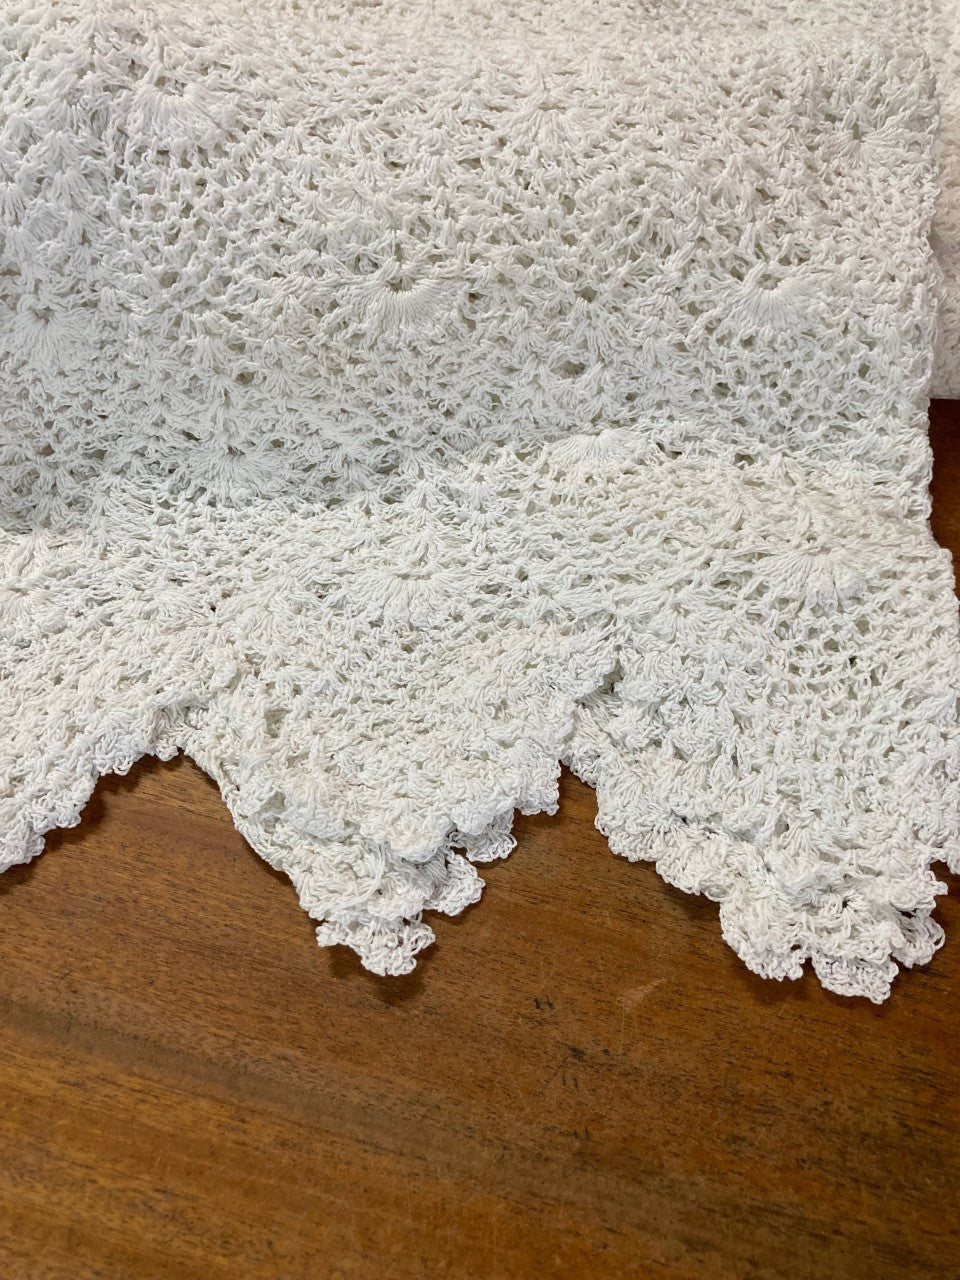 Hand Crochet Lace Tablecloth 70" Round White 100% Cotton Luxury